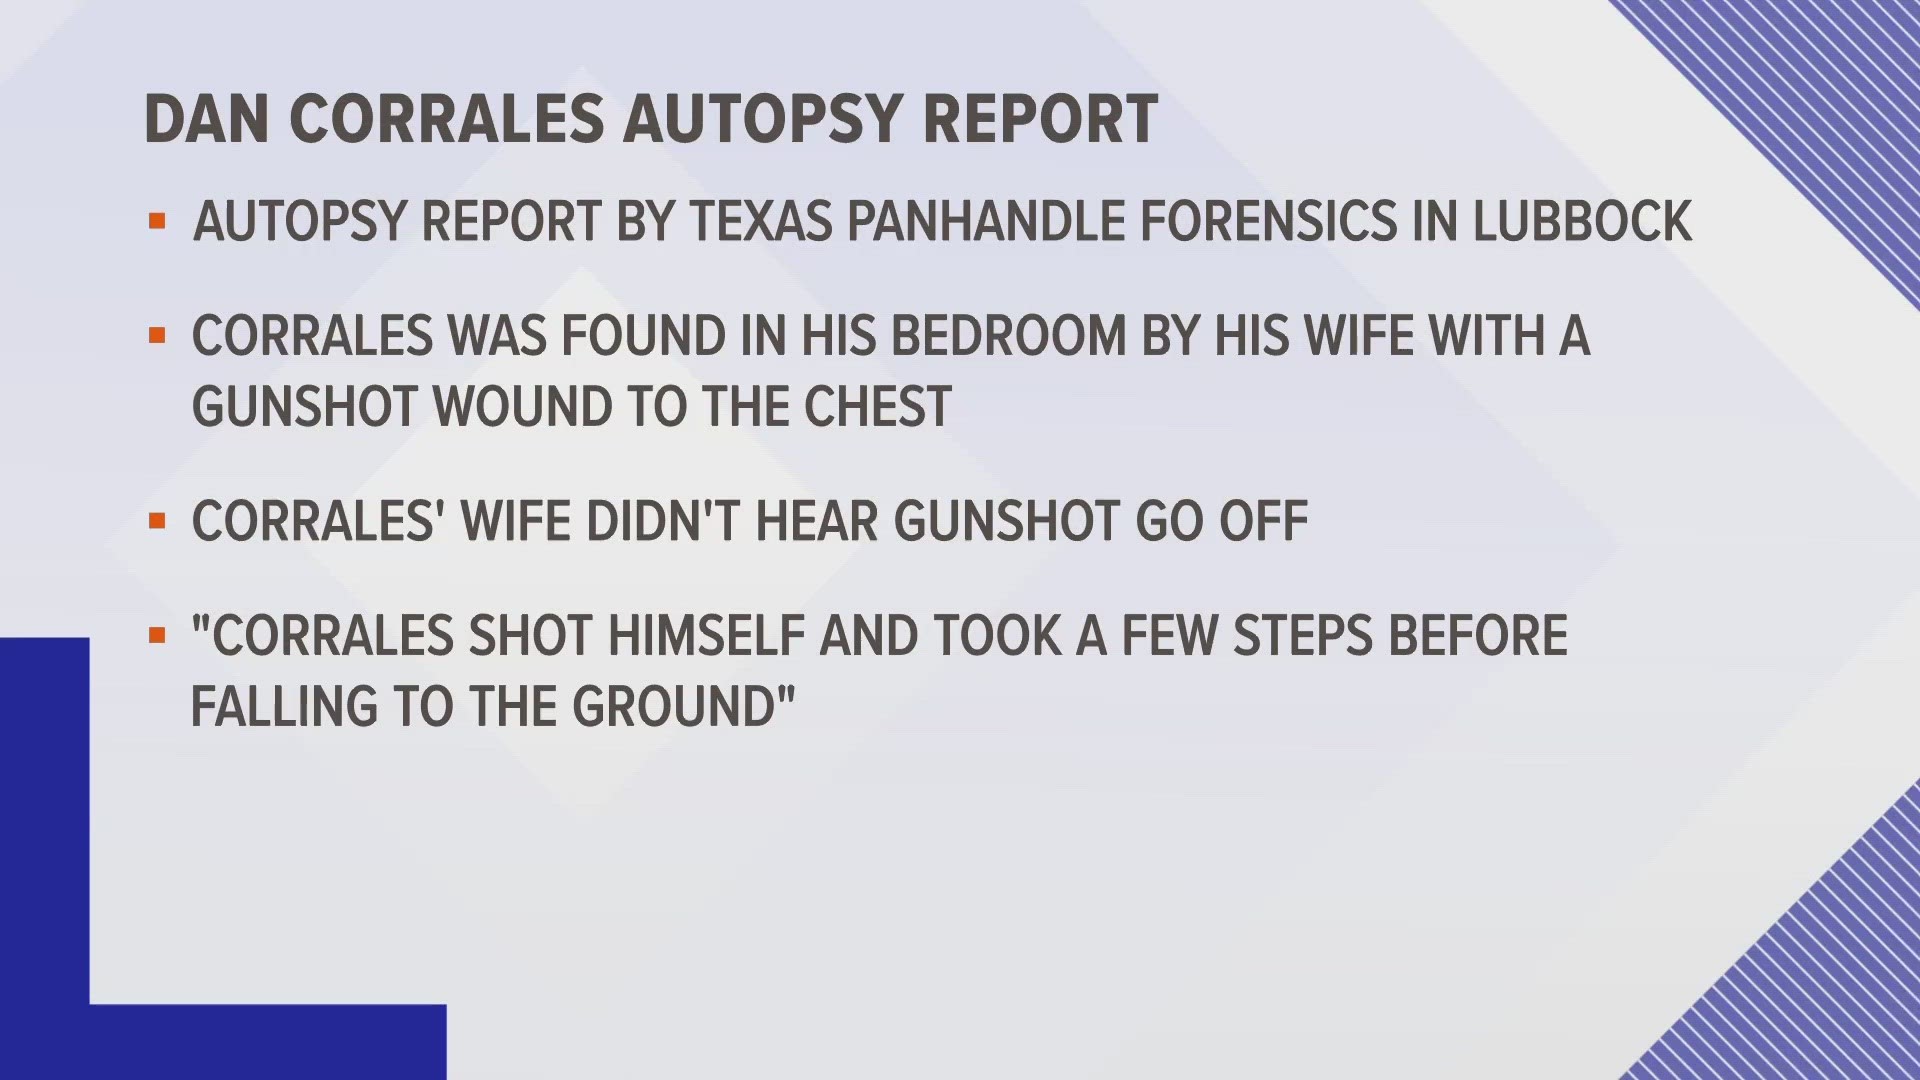 According to a full autopsy report from Texas Panhandle Forensics, Councilman Corrales was found by his wife in his bedroom with a gunshot wound to the chest.